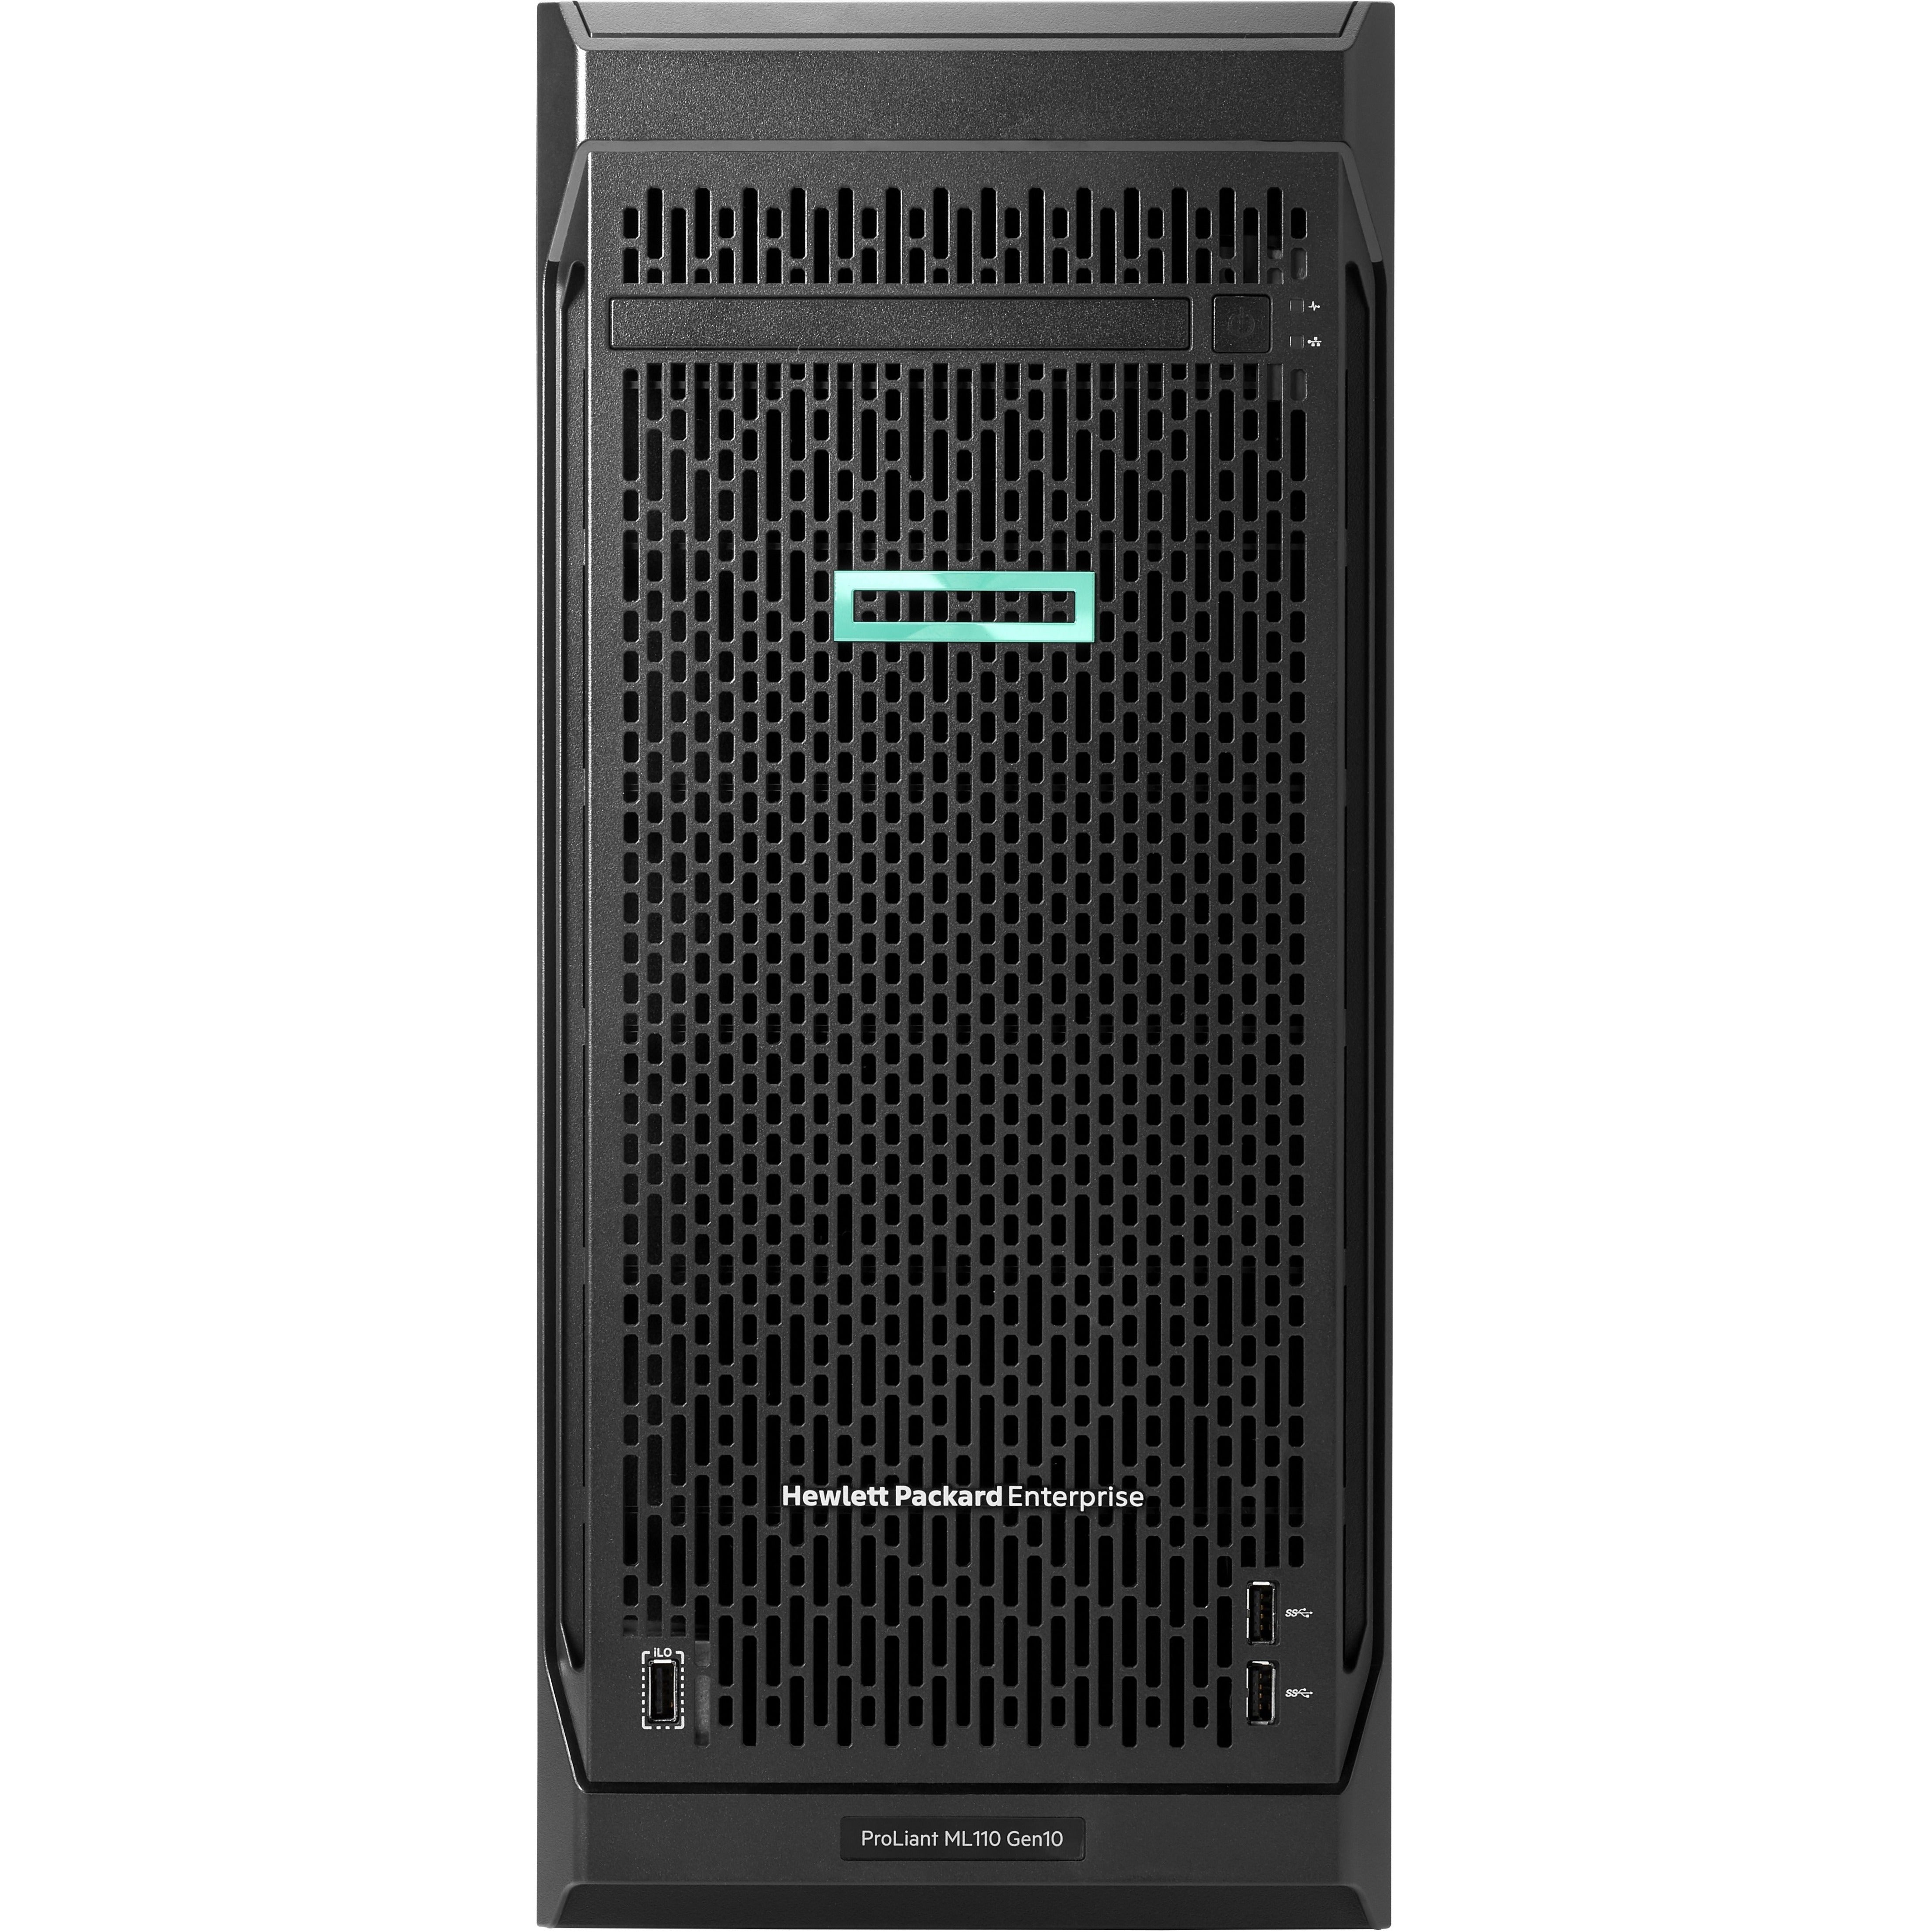 HPE P10812-001 ProLiant ML110 Gen10 4208 2.1GHz 8-core 1P 16GB-R S100i 4LFF 550W PS Server, 16GB DDR4, RAID Supported